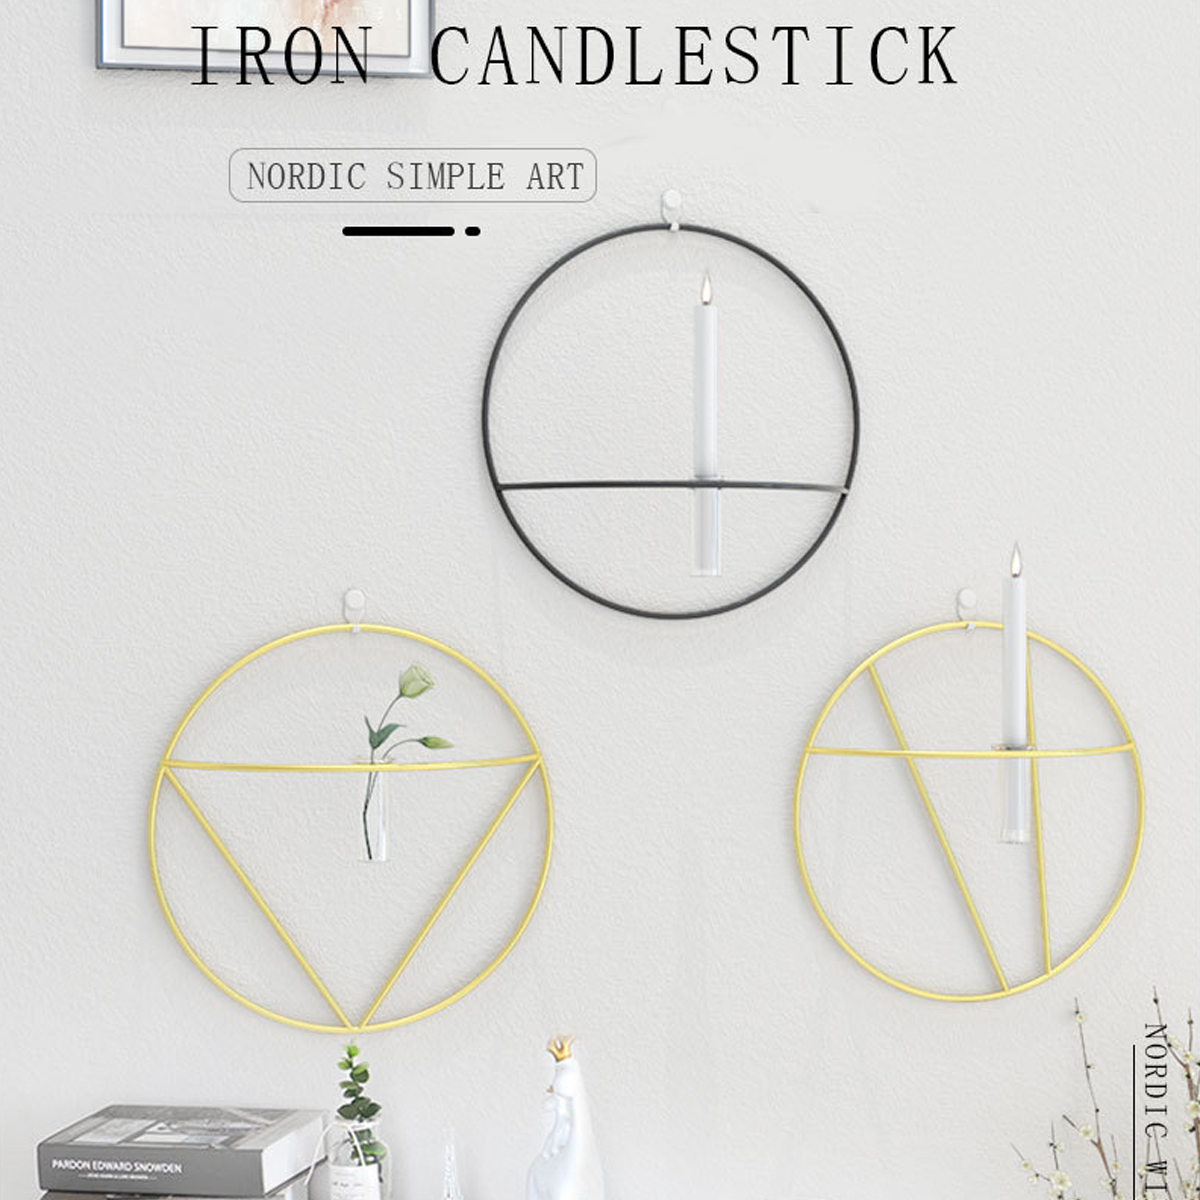 Nordic-Style-3D-Geometric-Candlestick-Metal-Wall-Candle-Holder-Home-Crafts-1727267-7